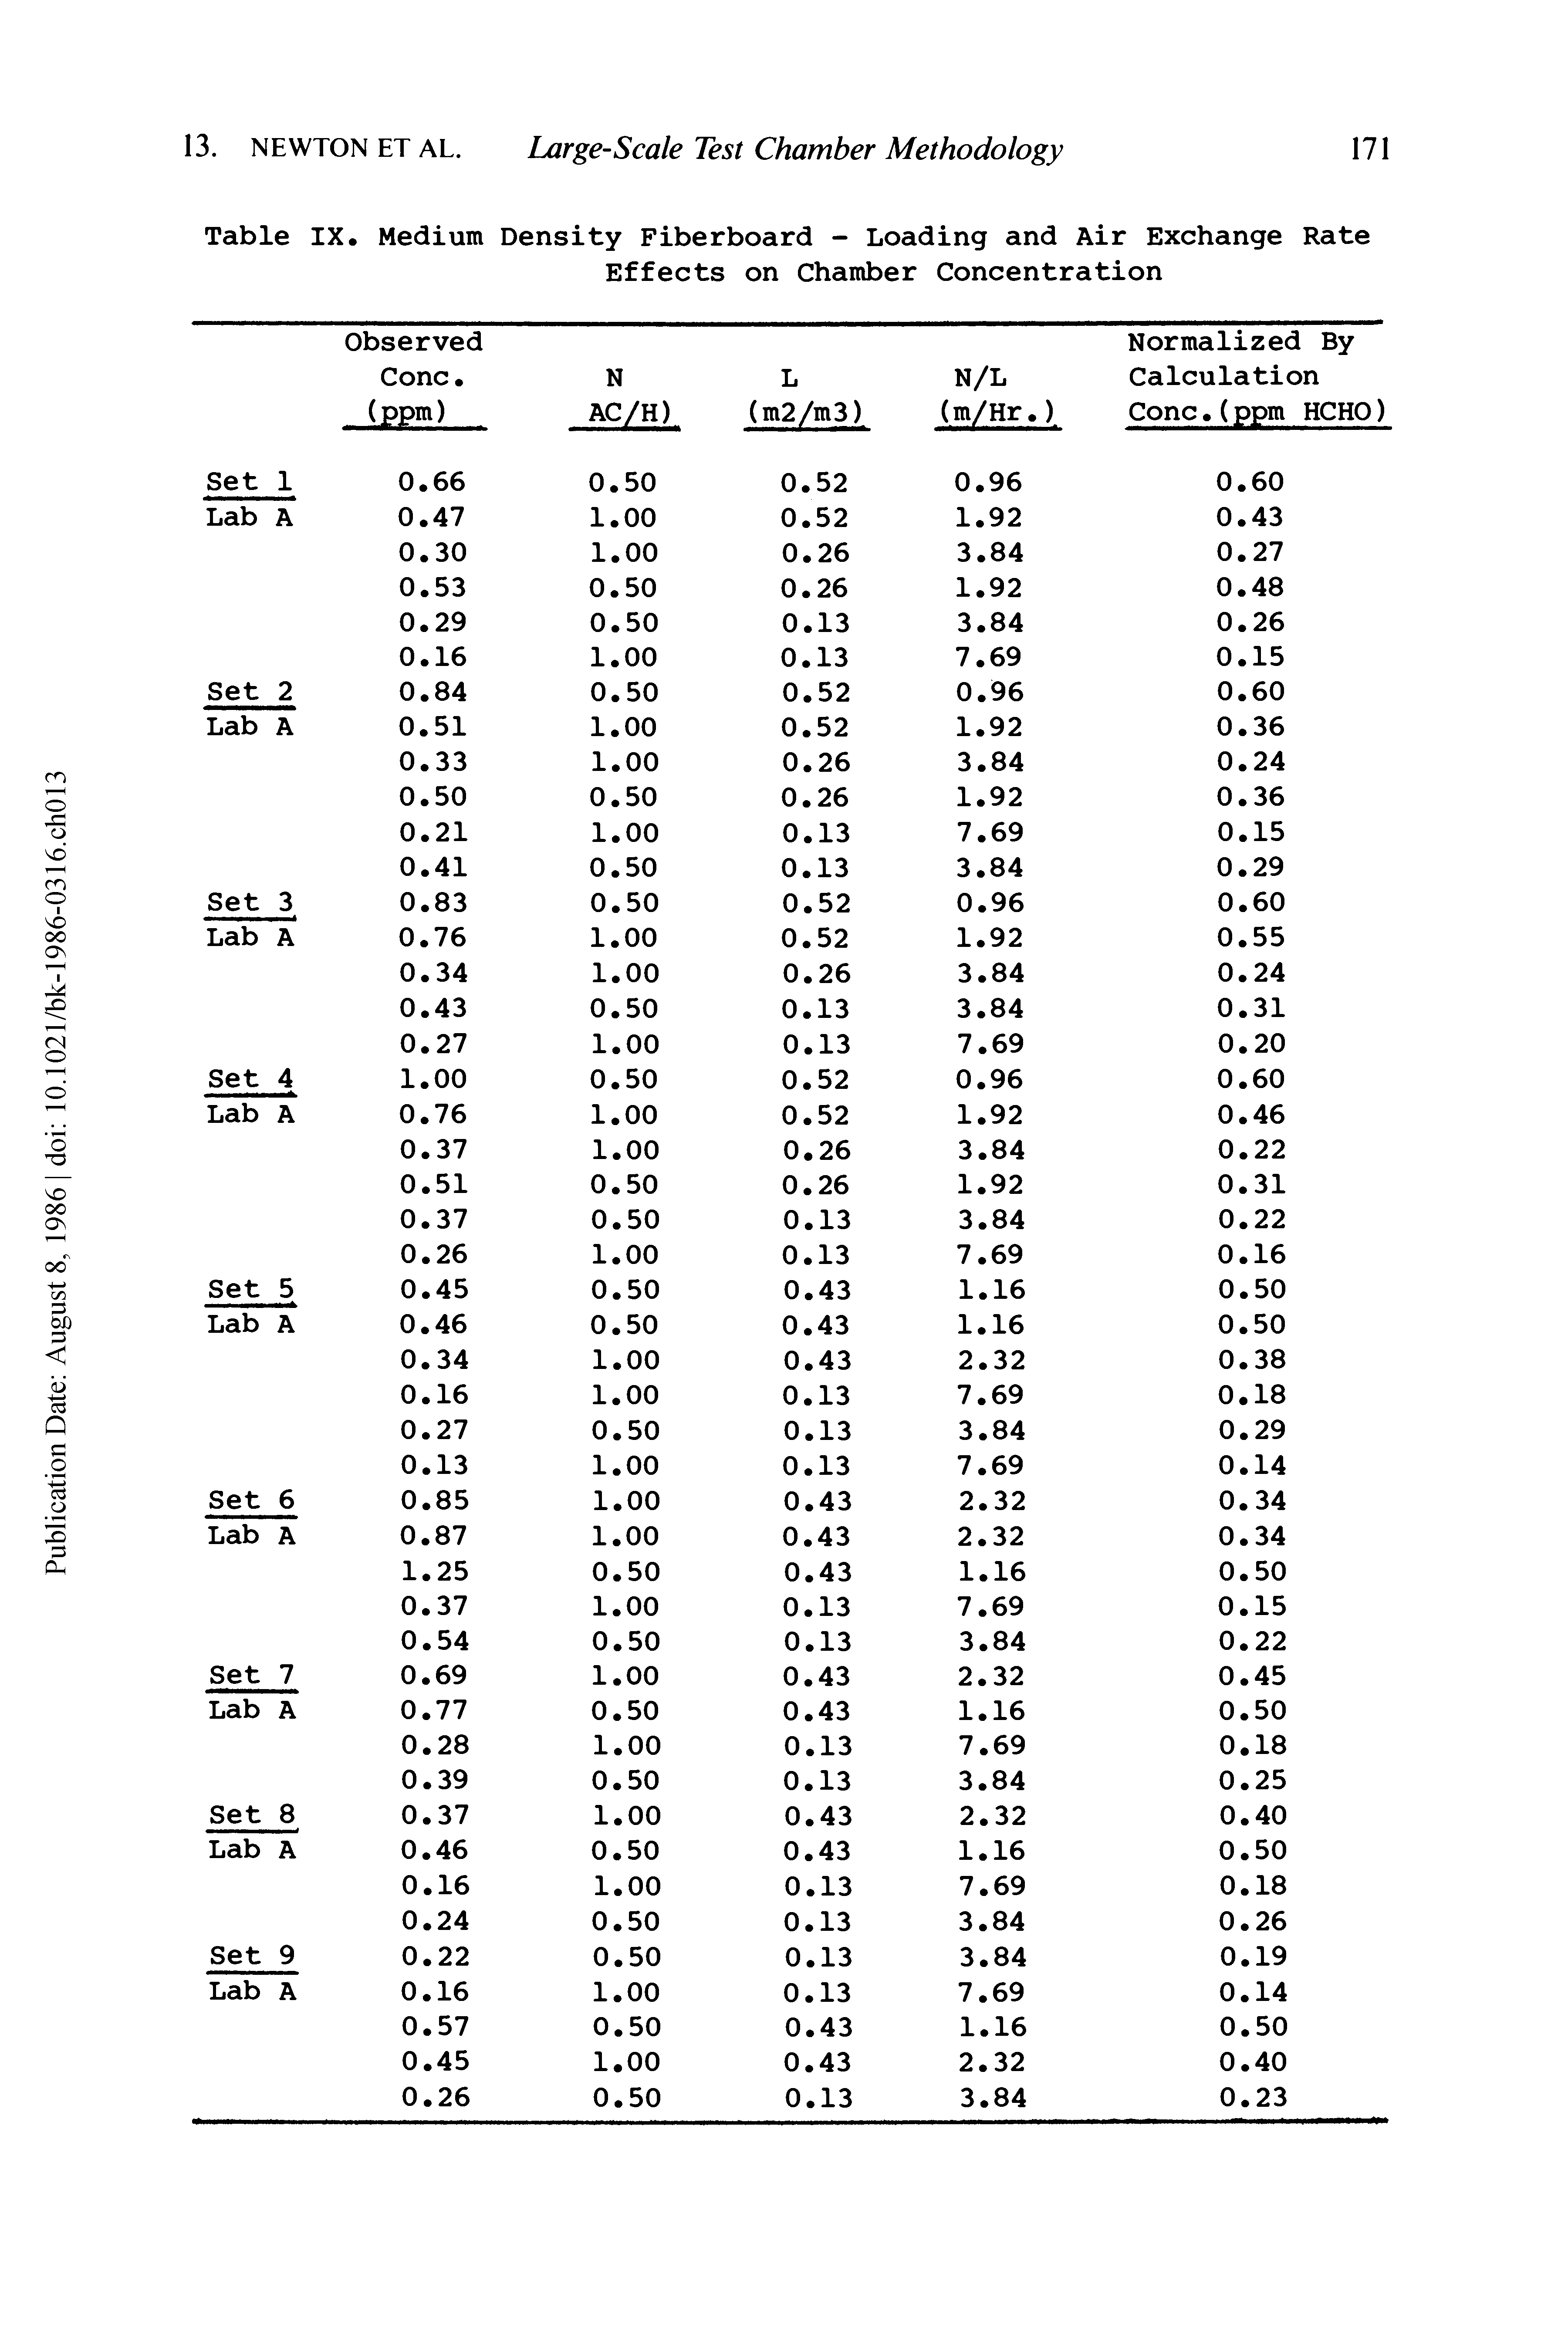 Table IX. Medium Density Fiberboard - Loading and Air Exchange Rate Effects on Chamber Concentration...